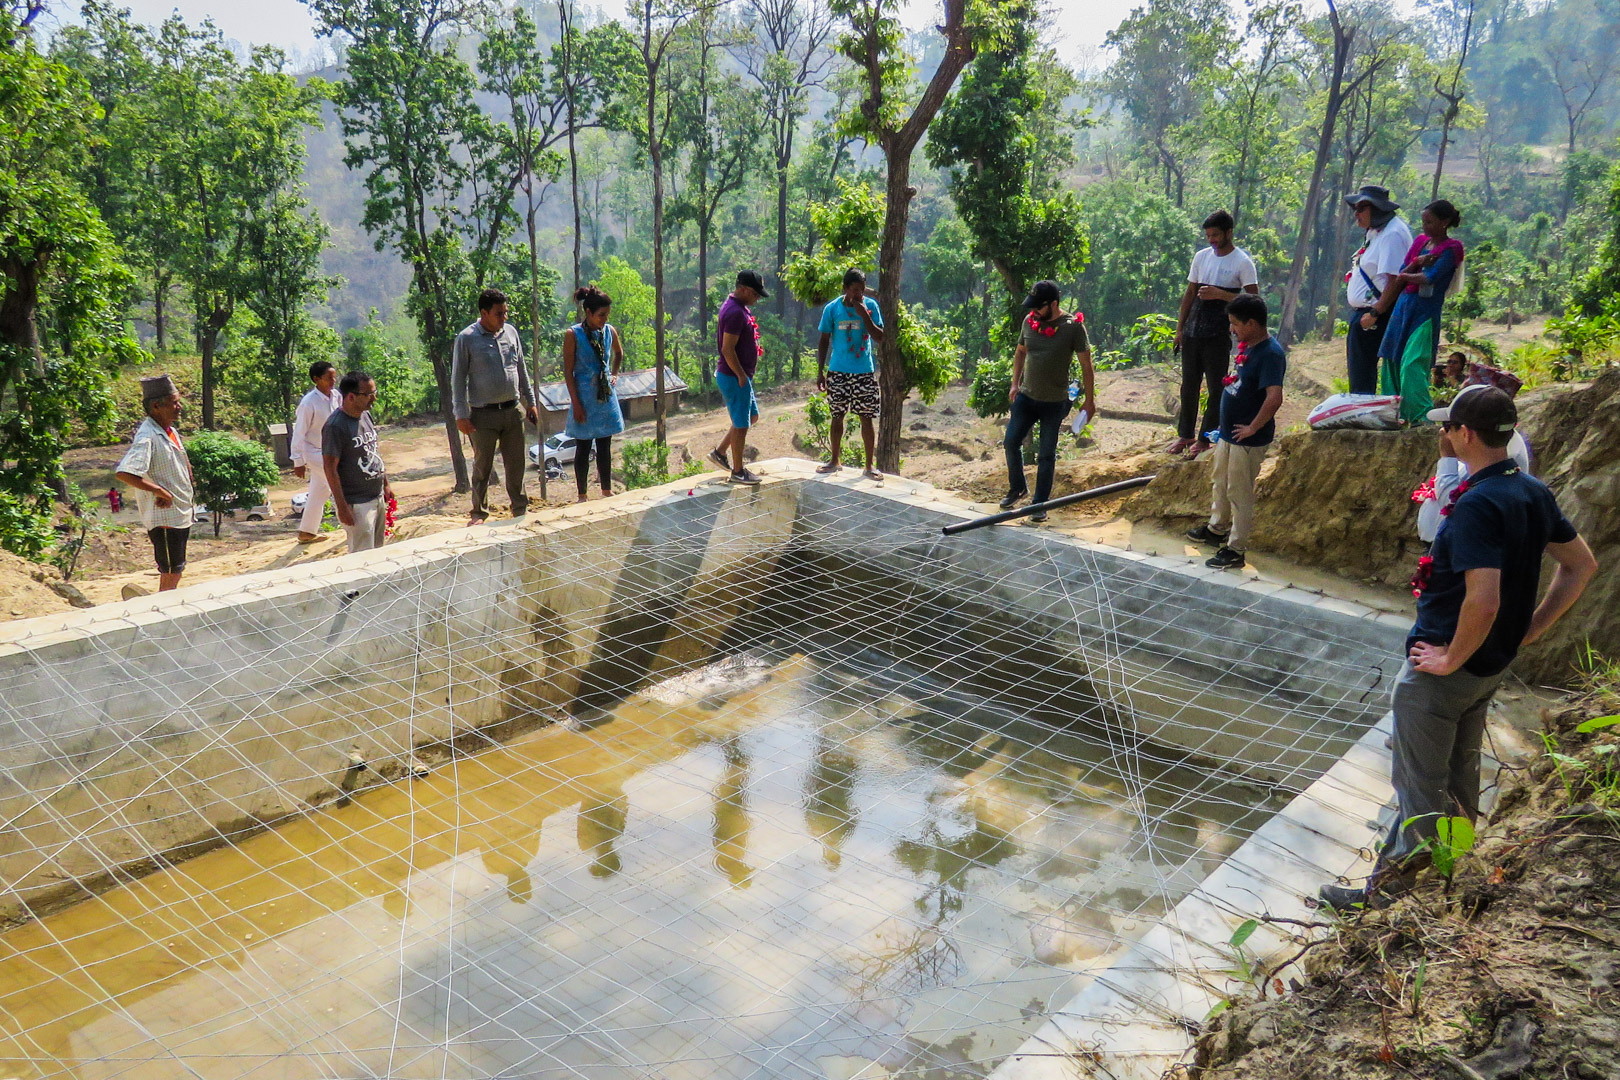 Representatives from USAID Nepal, IWMA, and USAID implementing partners gather with local villagers around a soil cement tank under construction by PAHAL during a group field visit to Milan Debari village, in the Rangun Khola watershed. Photo Credit: Liz Kendall